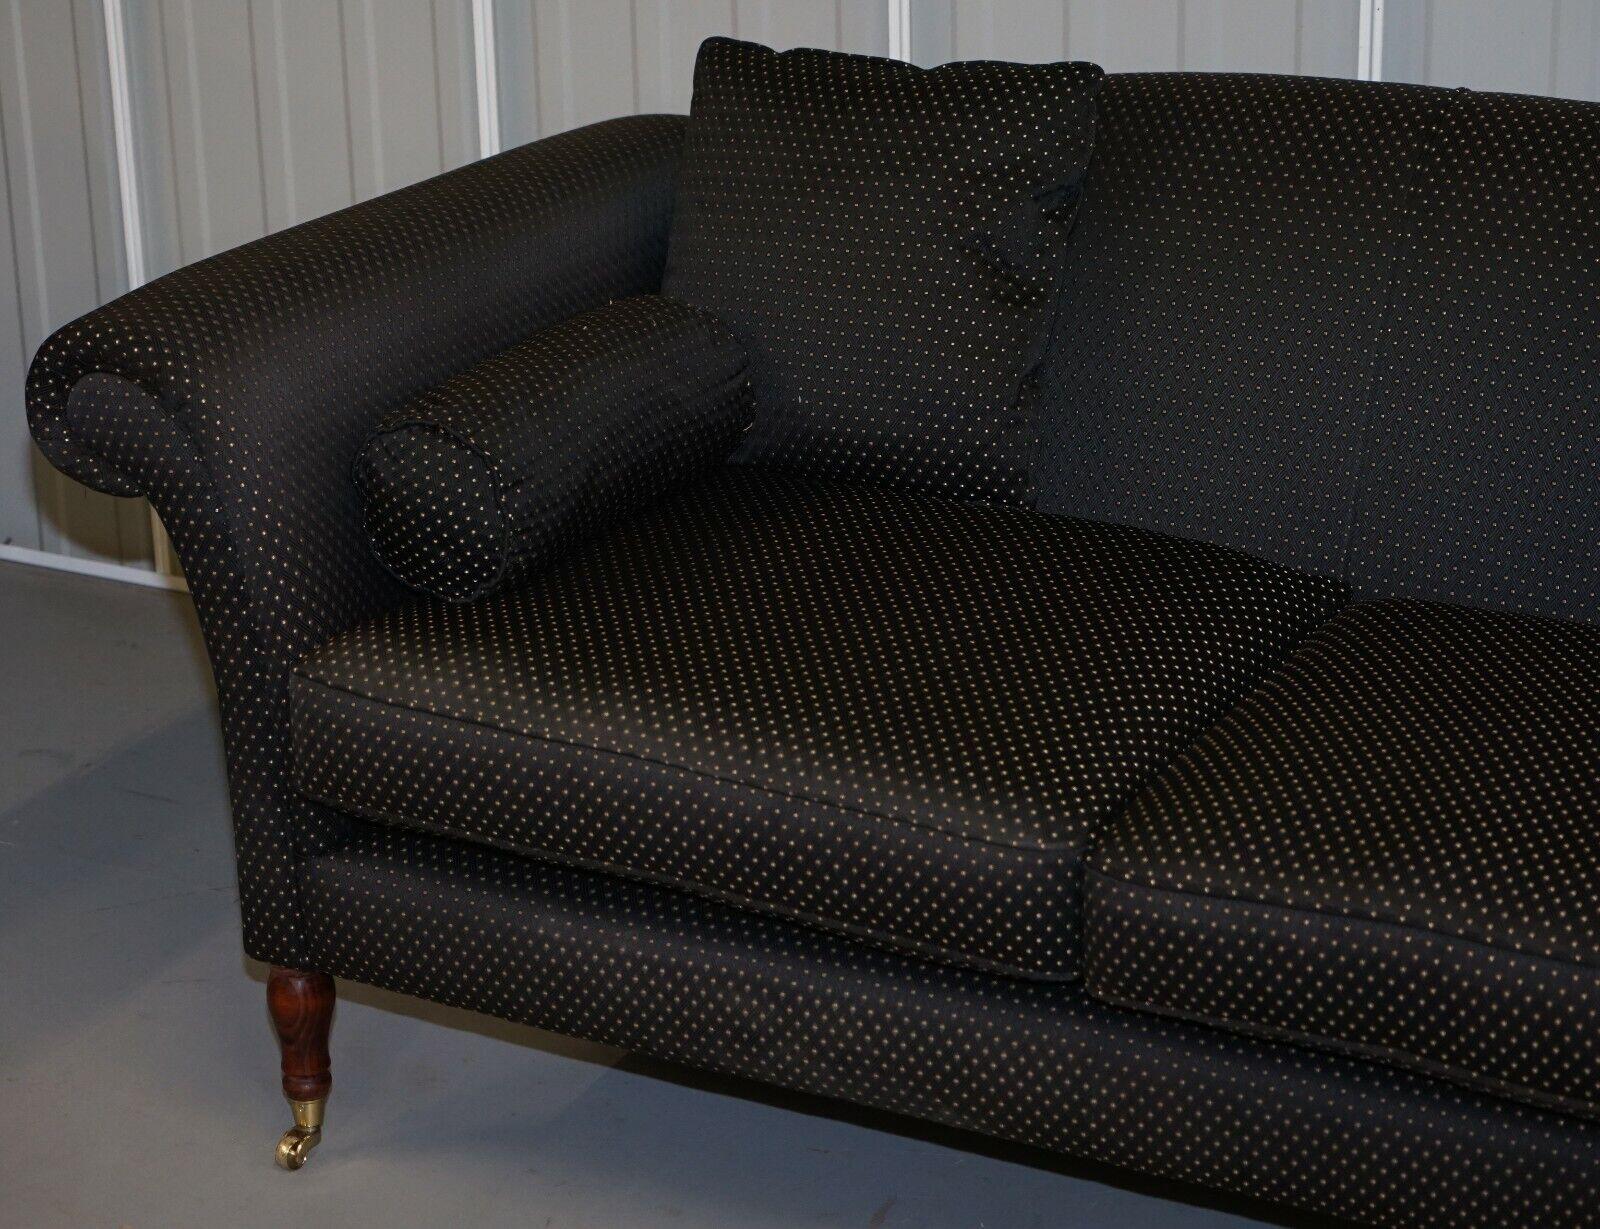 English HAND MADE BLACK & SiLVER UPHOLSTERED SOFA LIGHT HARDWOOD FRAME ONE OF TWO PIECES For Sale